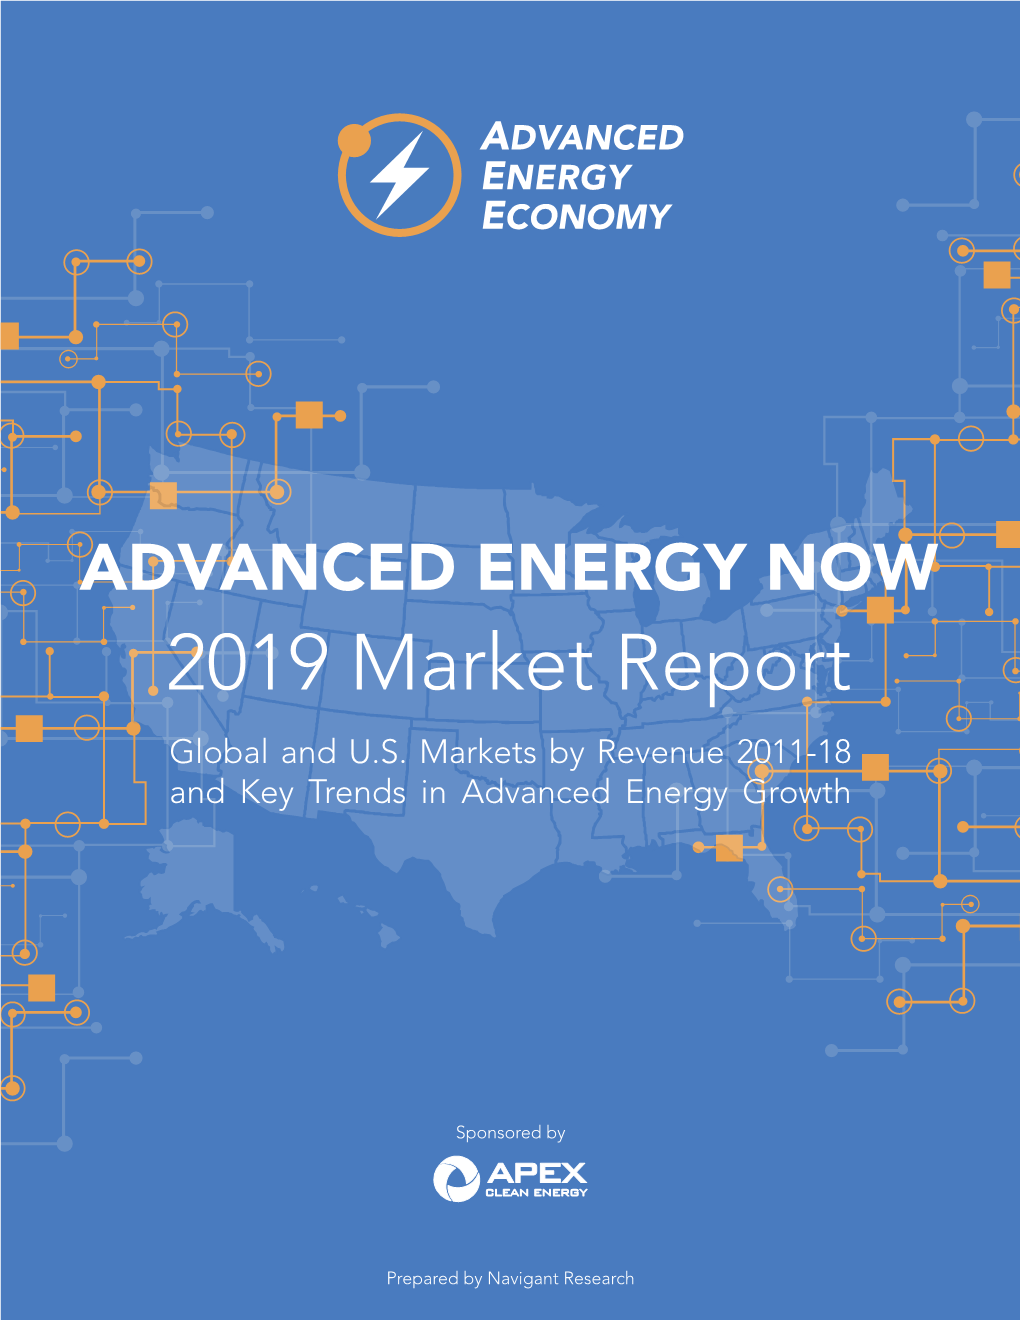 ADVANCED ENERGY NOW 2019 Market Report Global and U.S